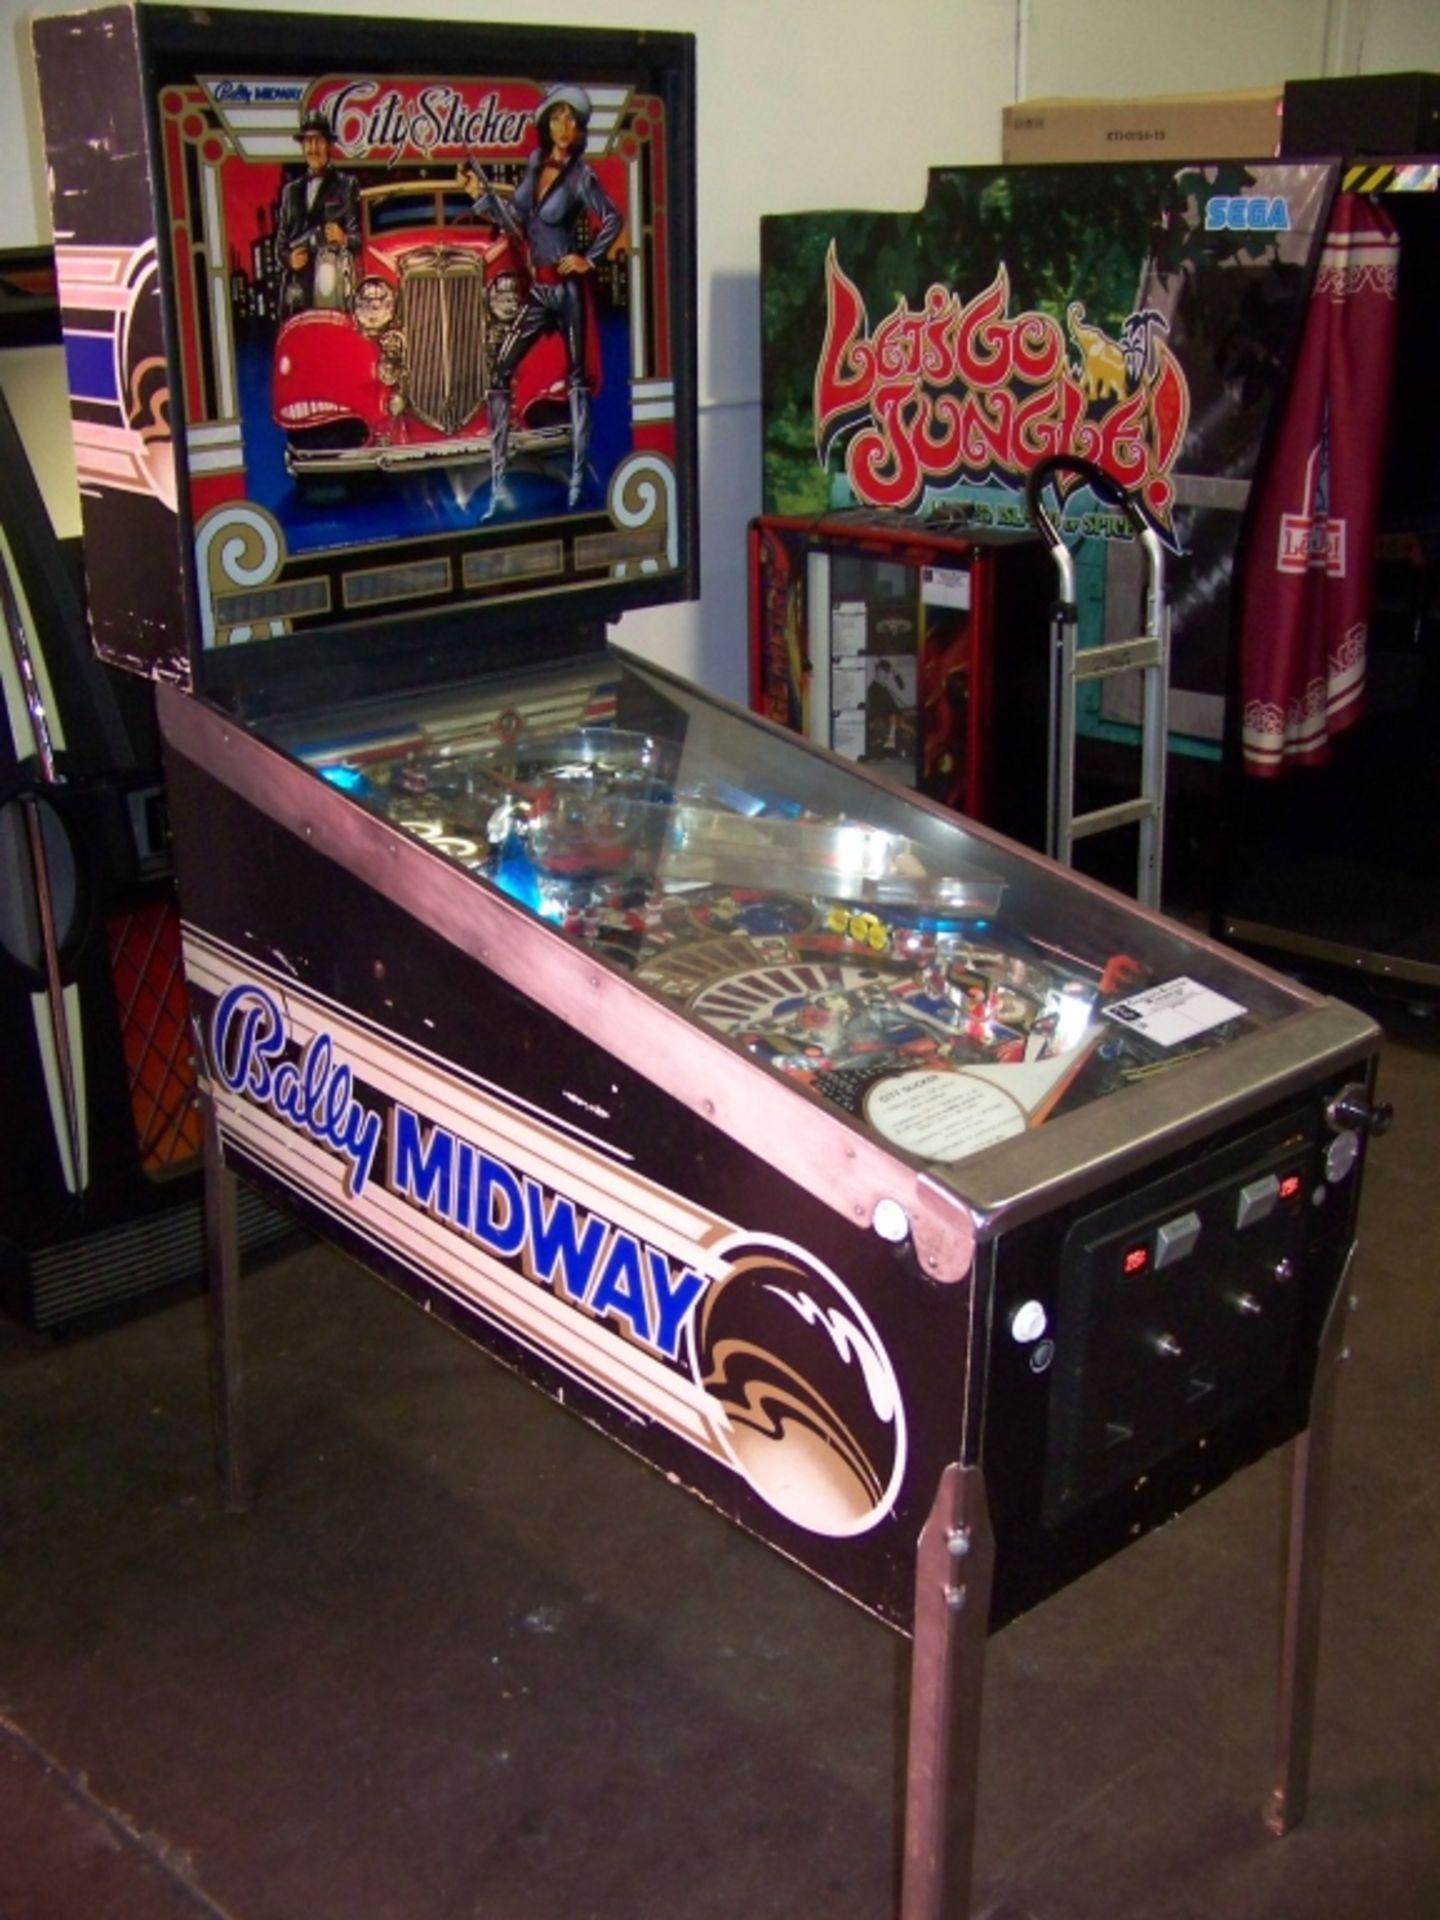 CITY SLICKER PINBALL MACHINE BALLY 1987 RARE! Item is in used condition. Evidence of wear and